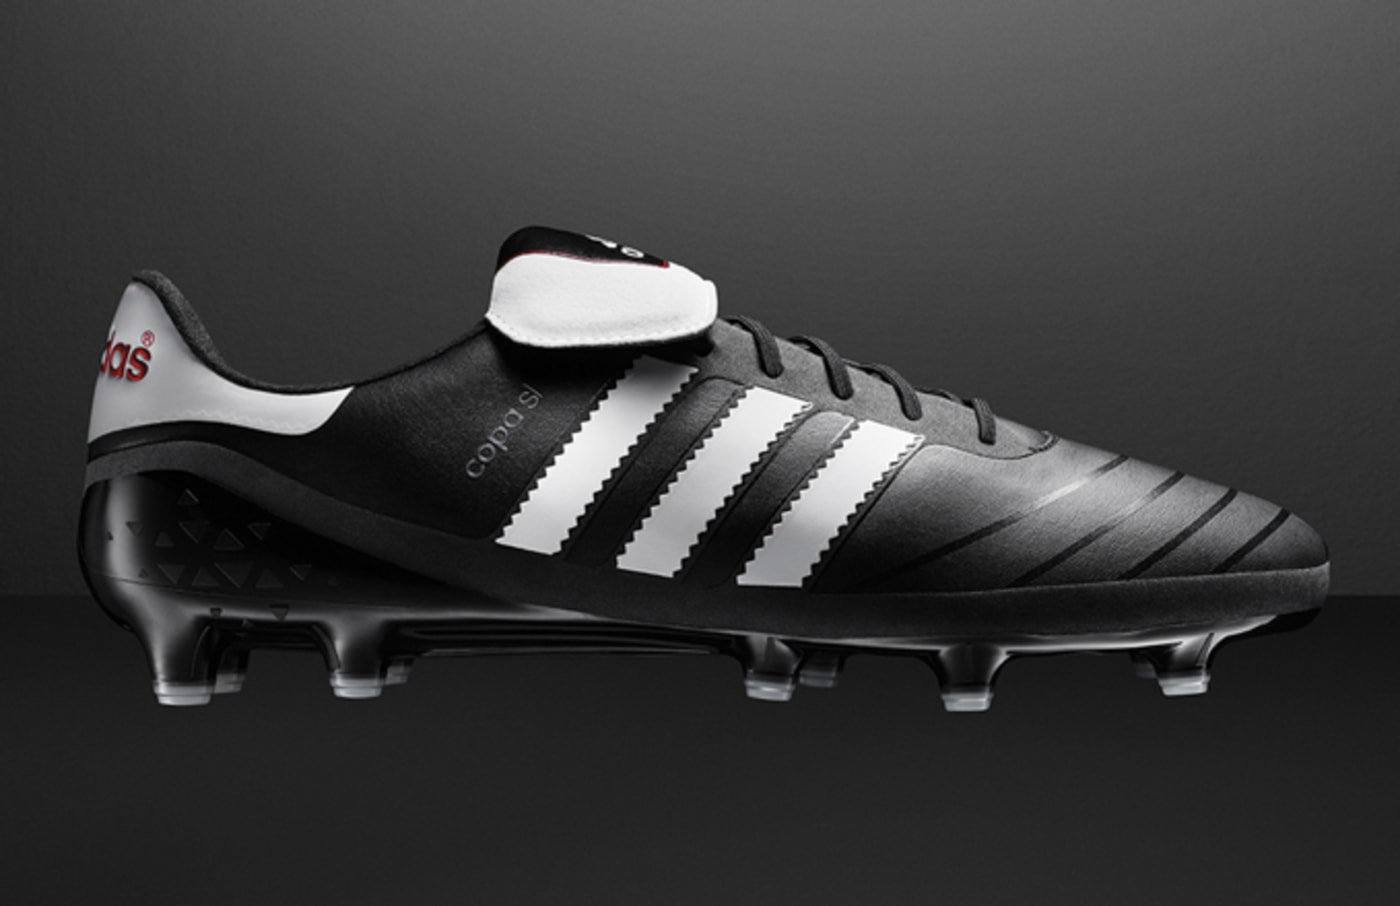 adidas Just Most Iconic Boot with the Release of COPA SL | UK